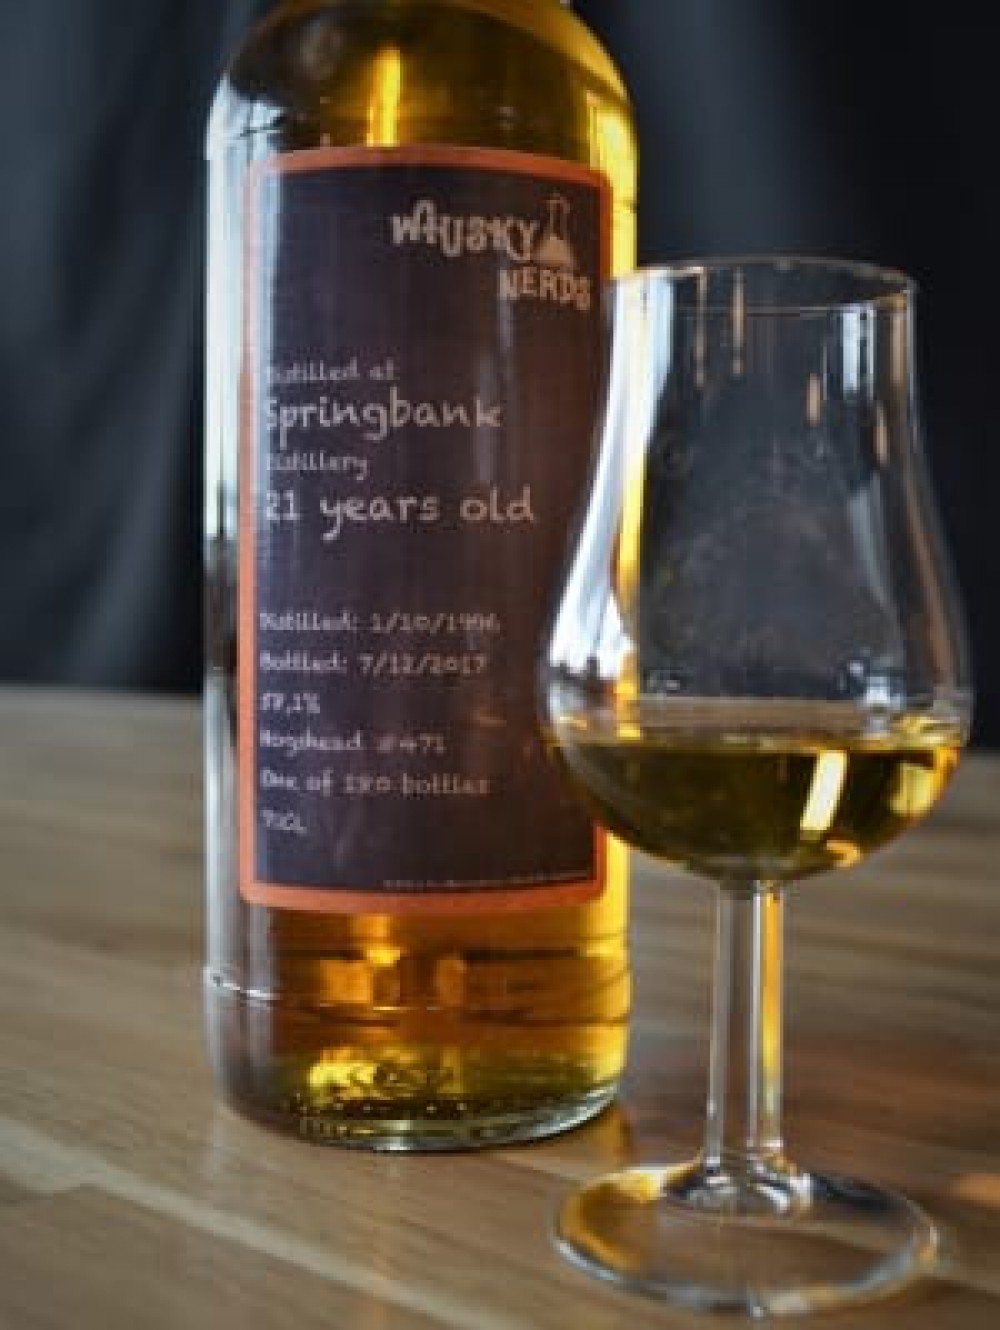 For real Nerds only - Springbank 21